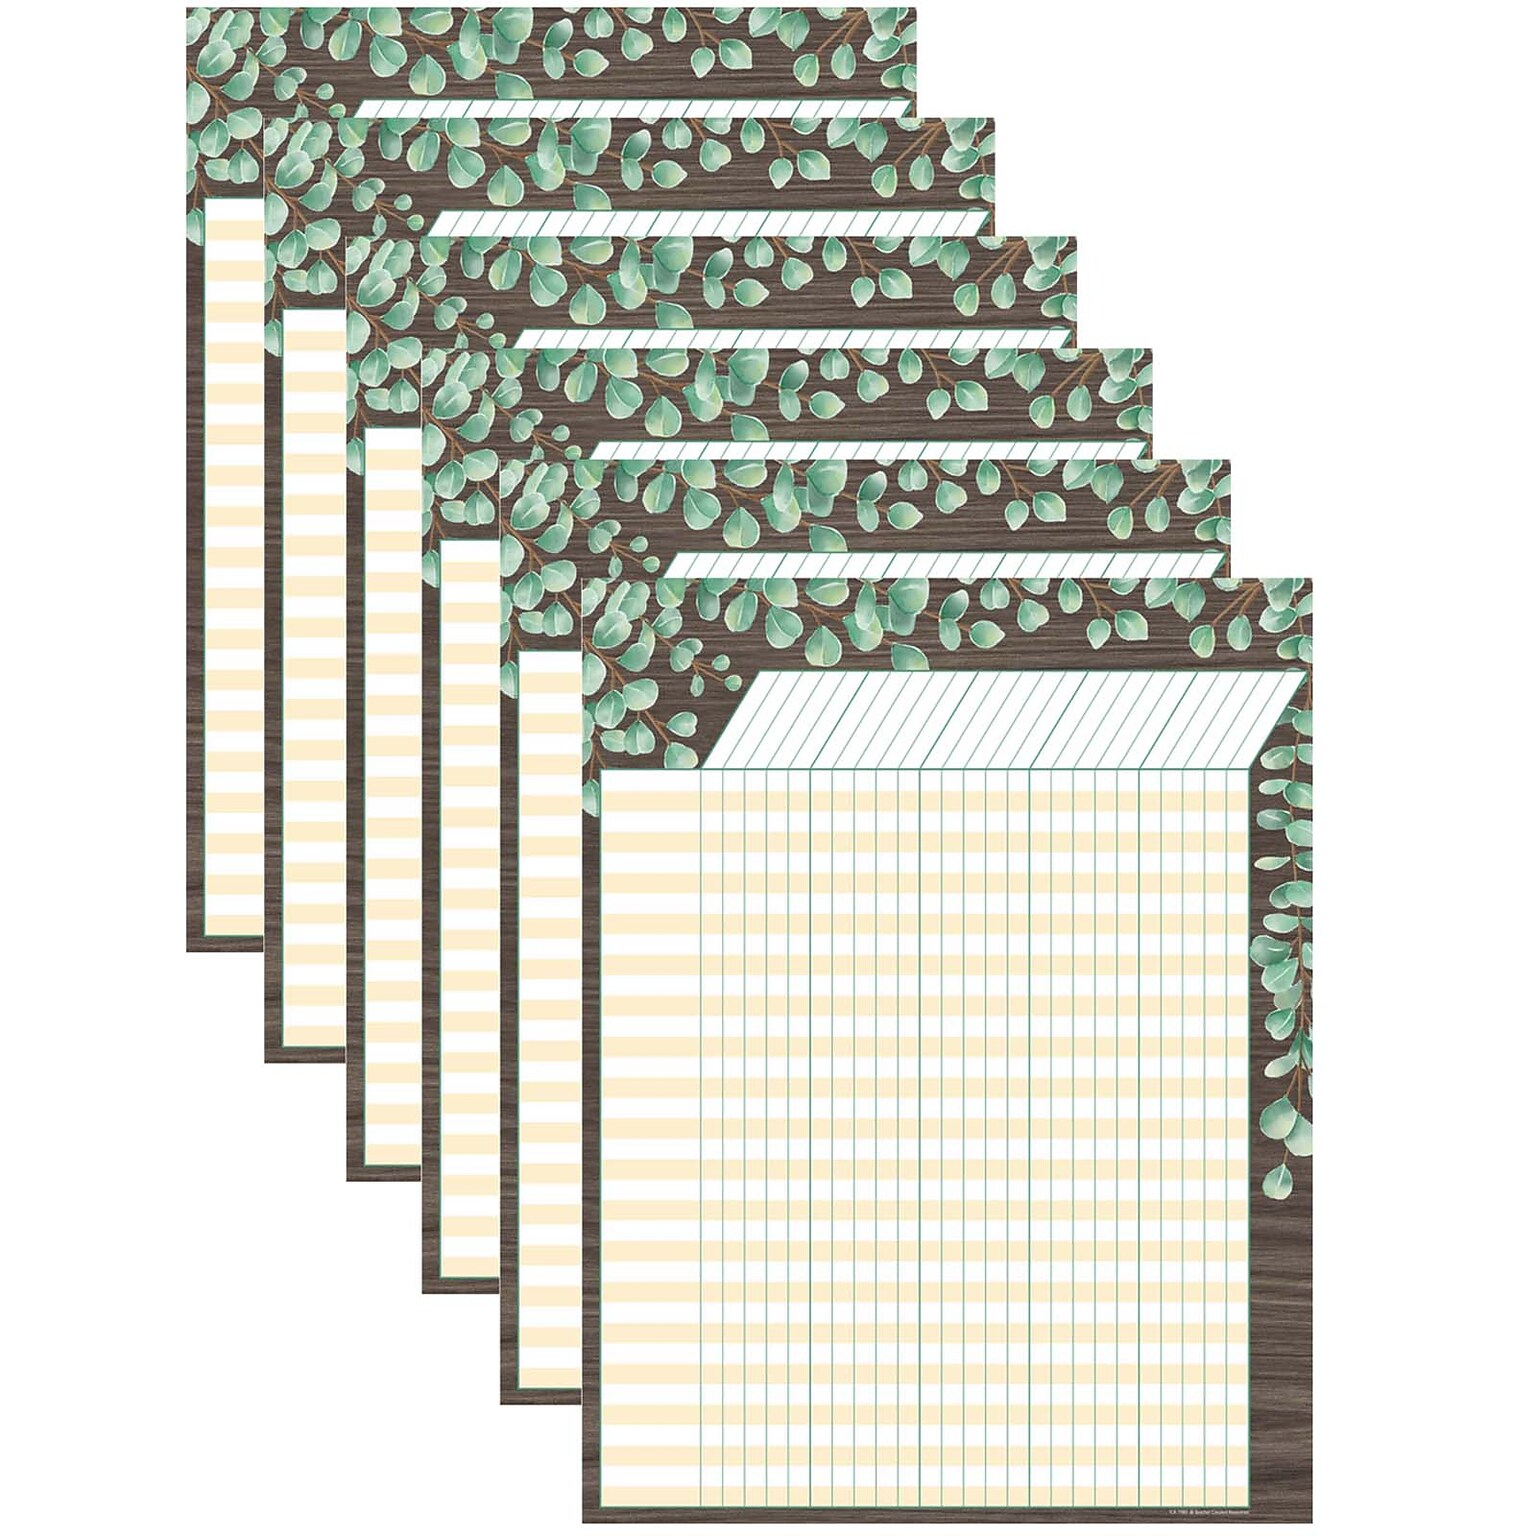 Teacher Created Resources Incentive Chart, 17 x 22, Eucalyptus, Pack of 6 (TCR7980-6)